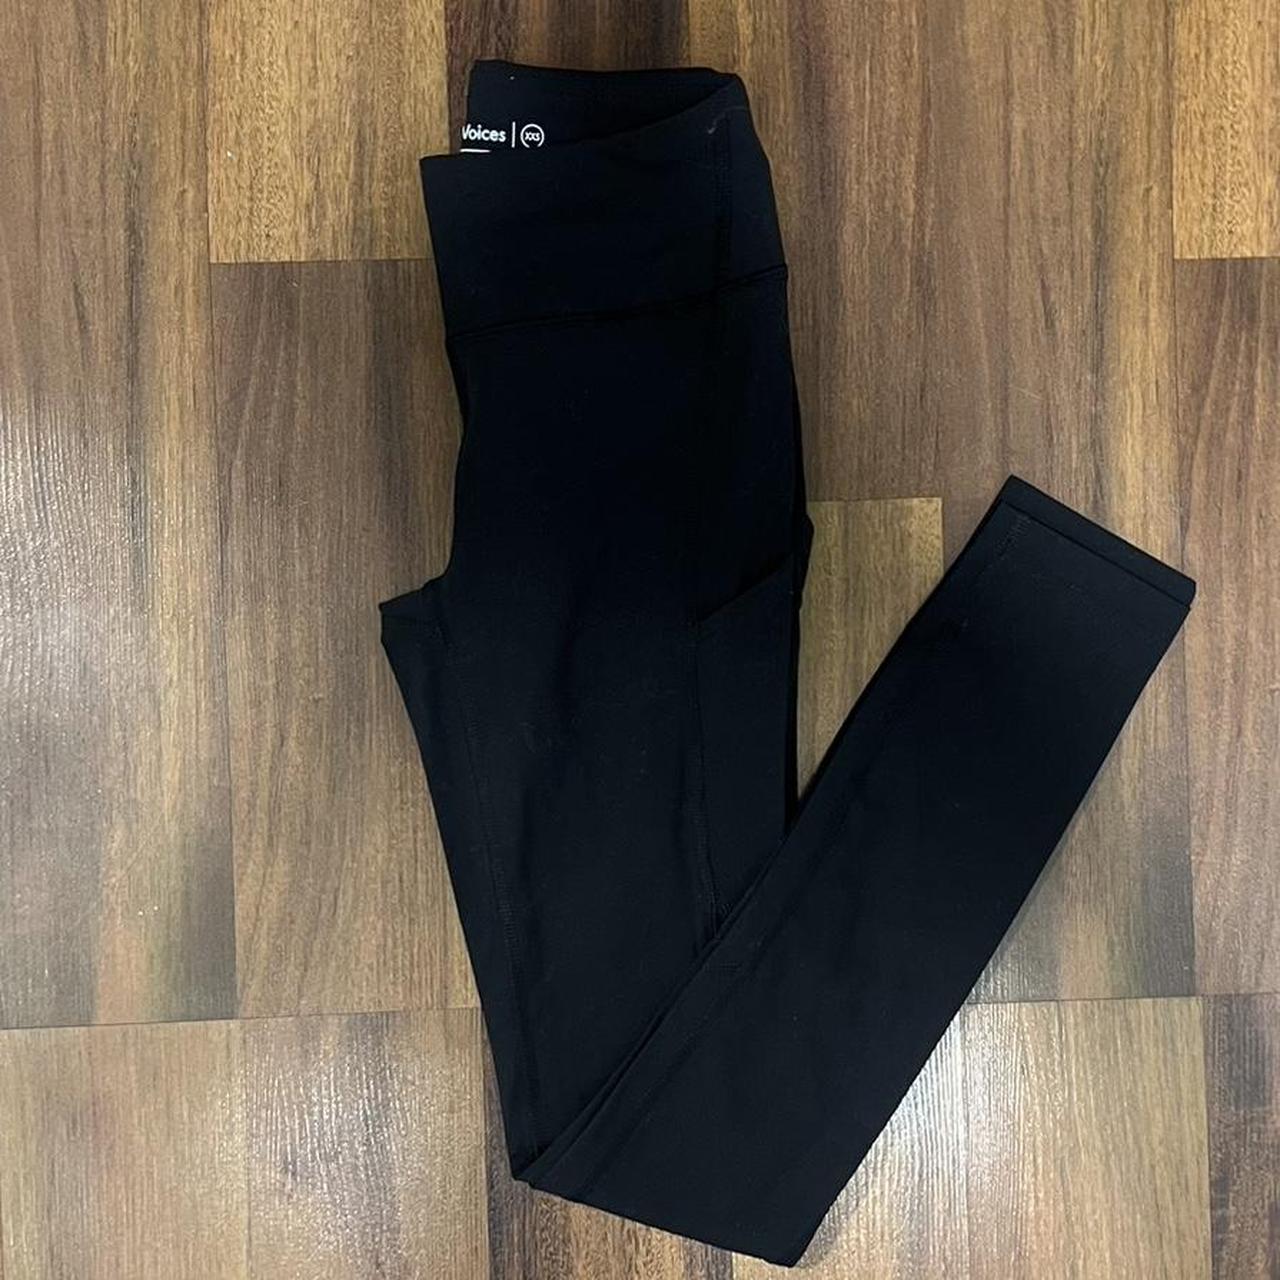 7/8 black (zoom) sport leggings with pockets from